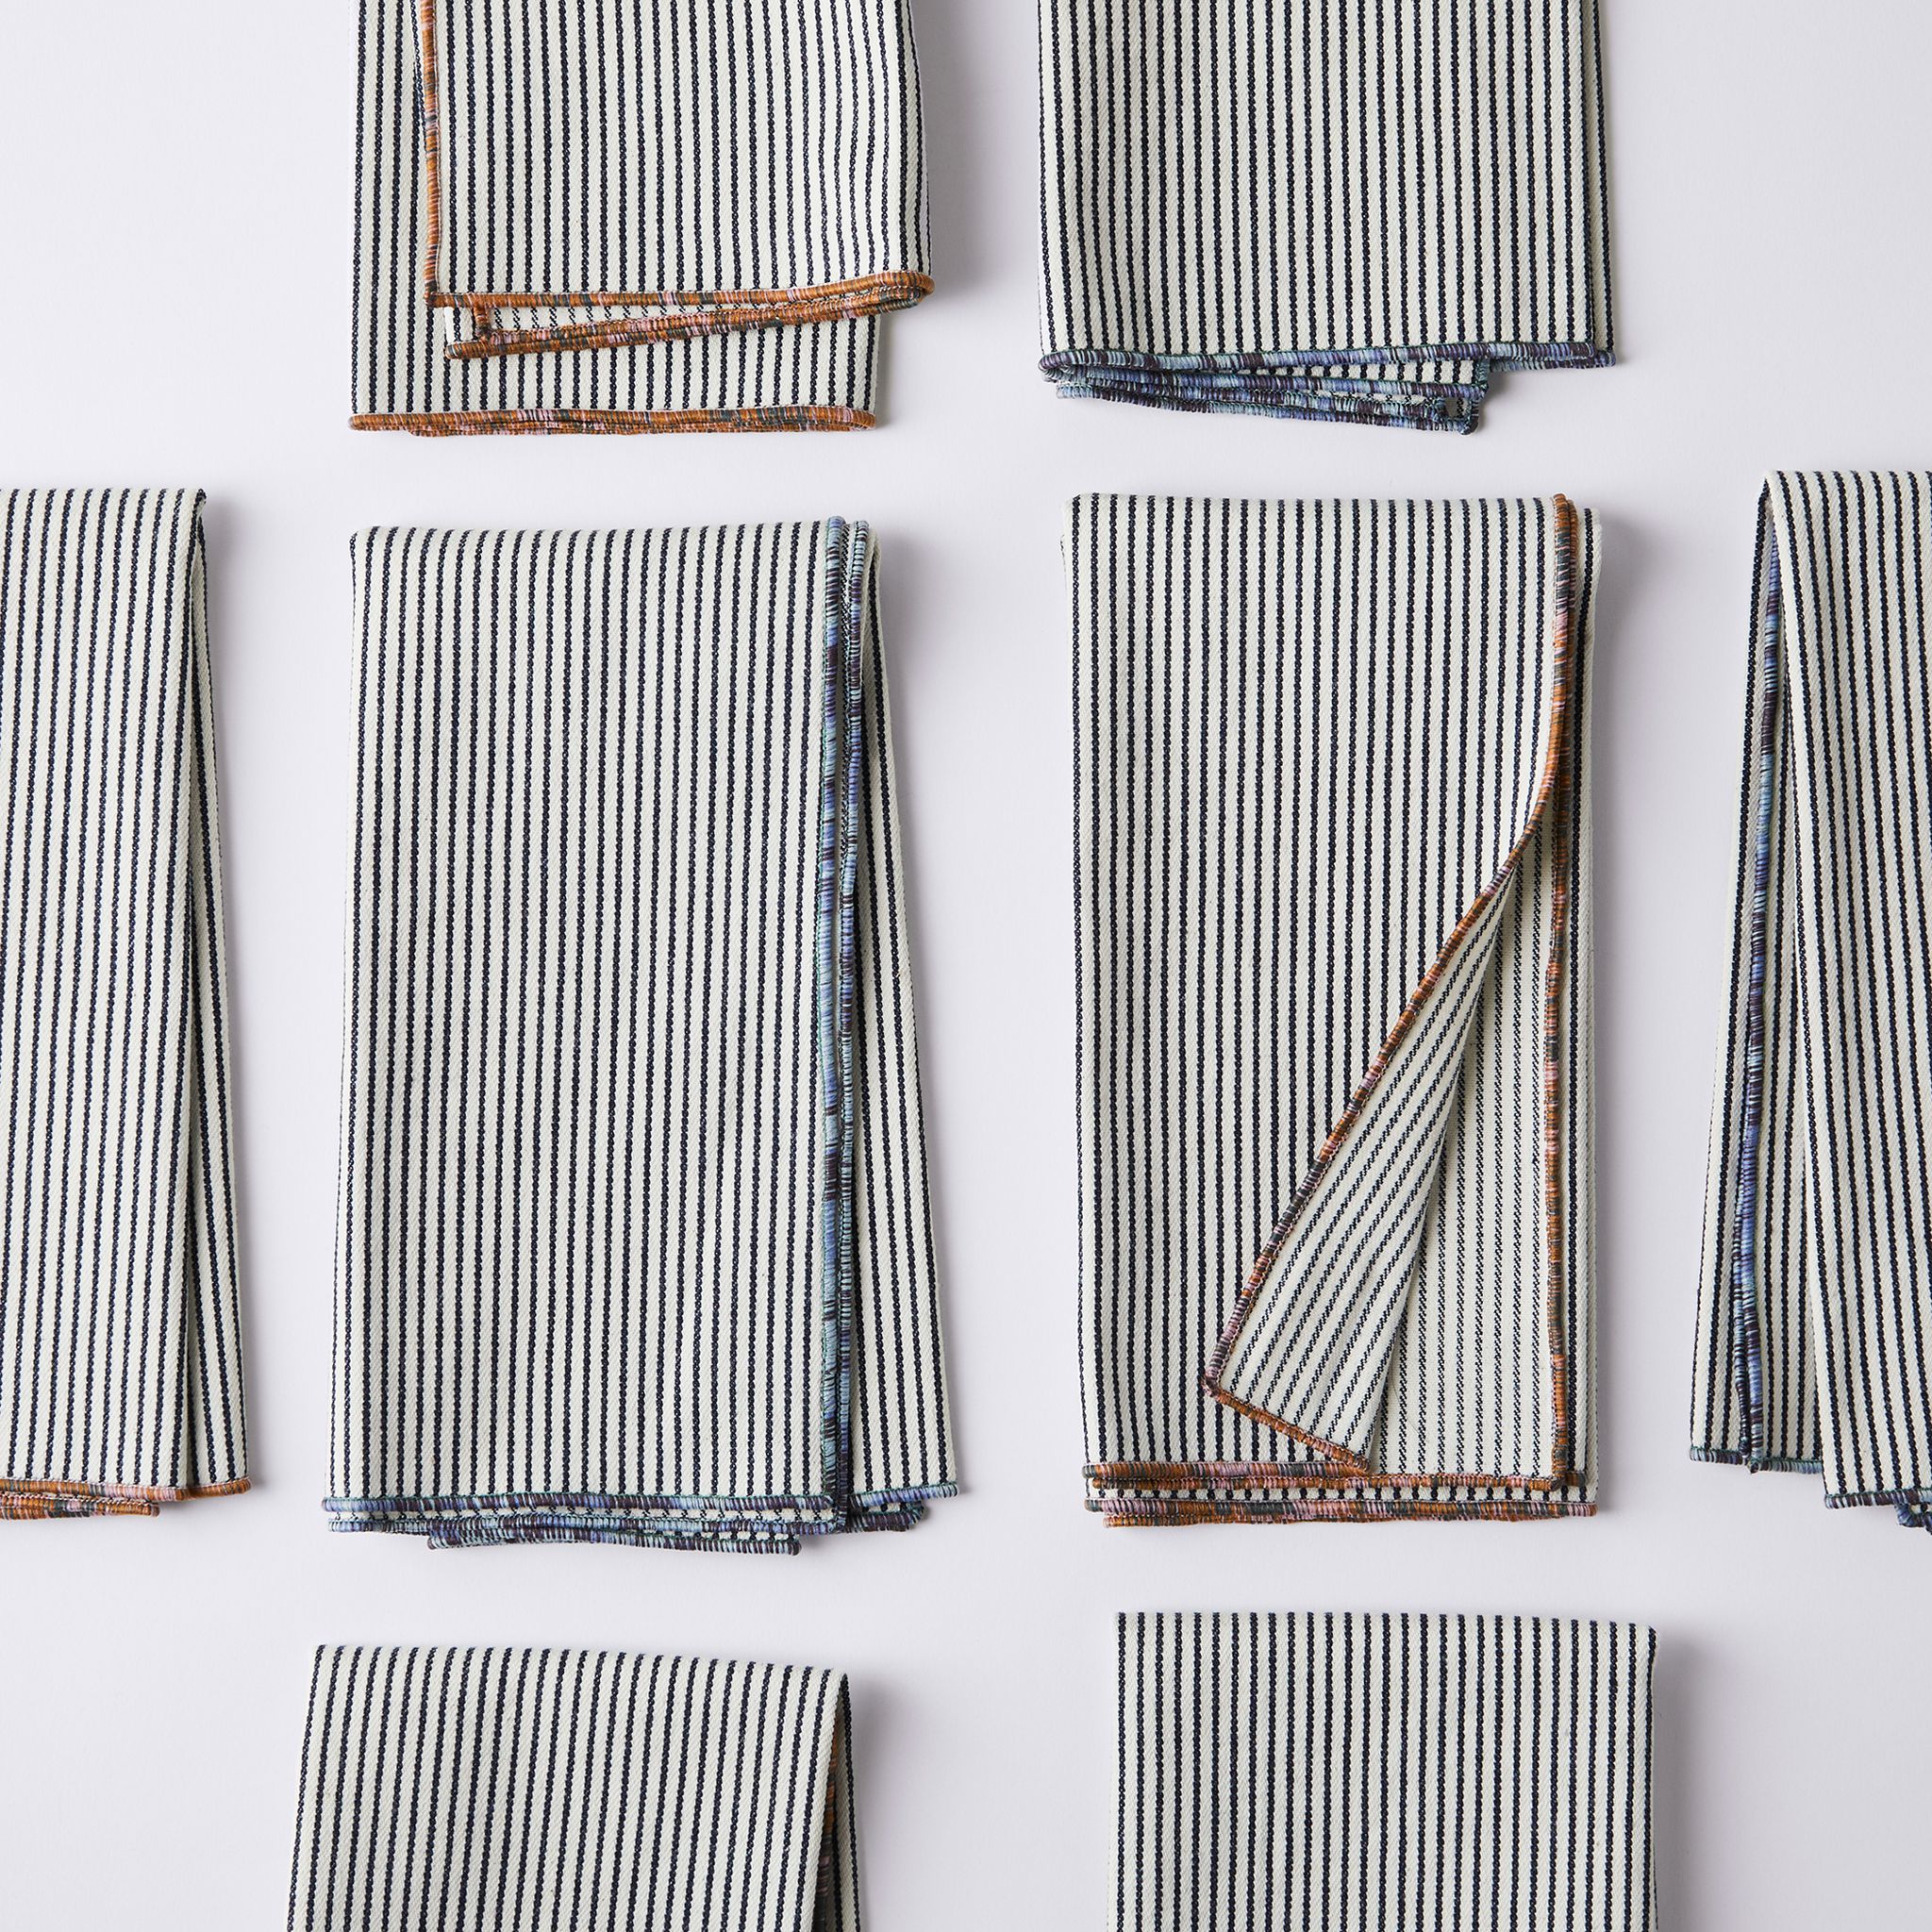 Reclaimed Patterned Napkins, Limited Edition